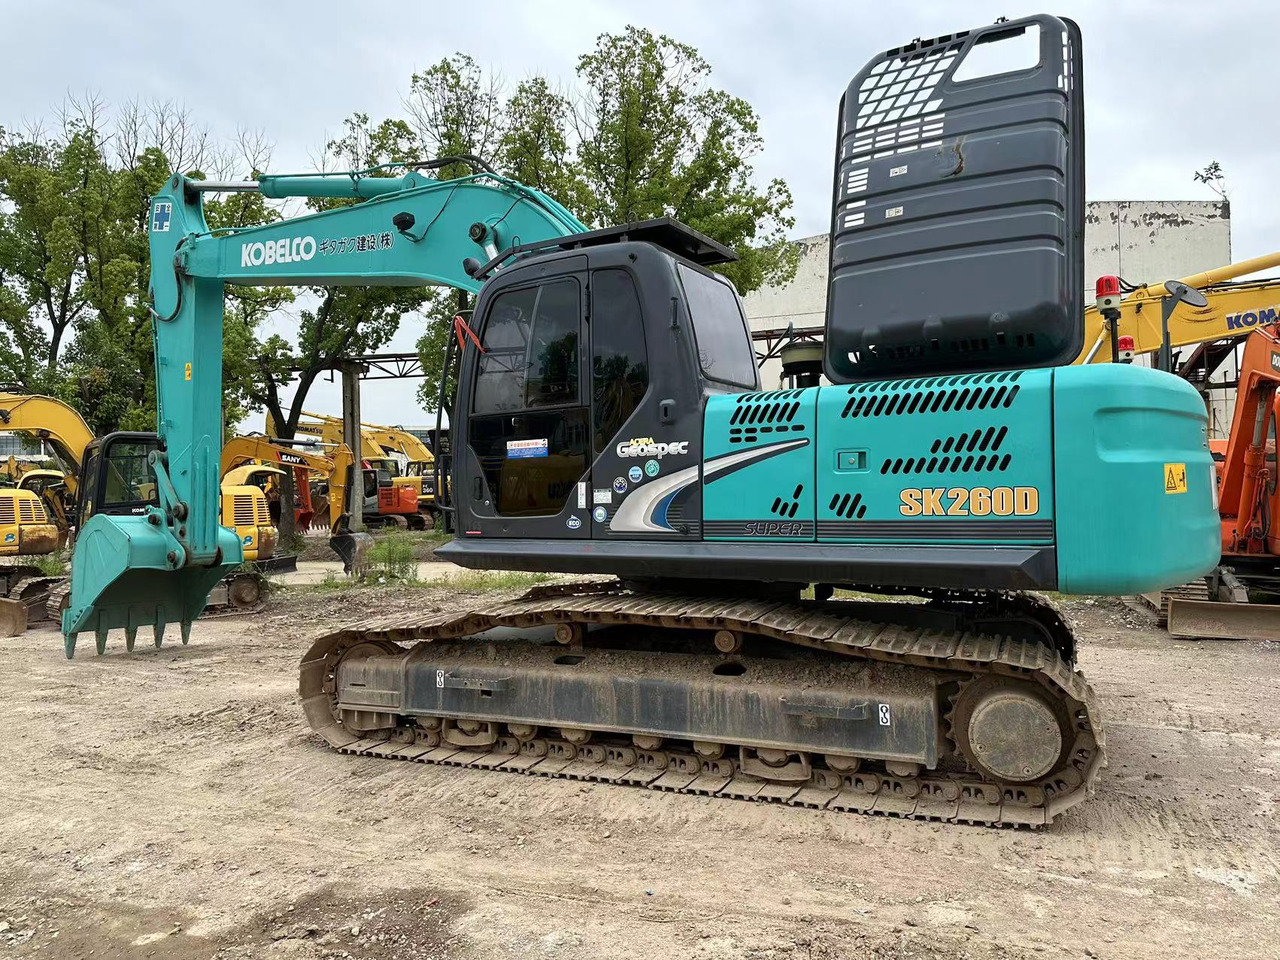 Crawler excavator KOBELCO 26 ton original used excavator SK260D, Large engineering construction machinery good condition low price for sale: picture 4